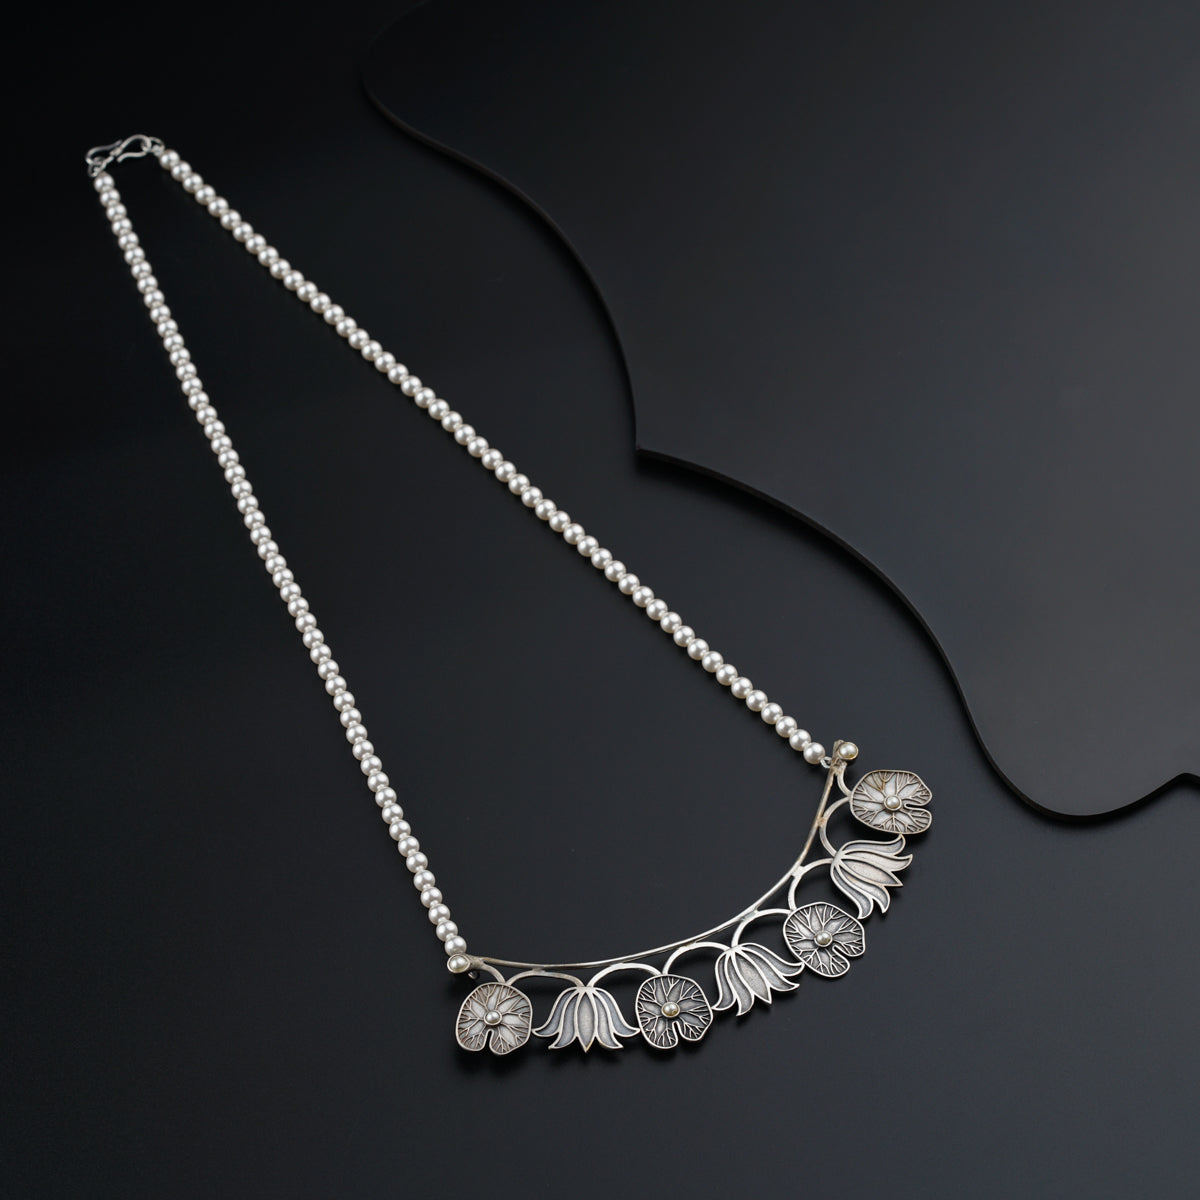 a silver necklace with flowers on a black background